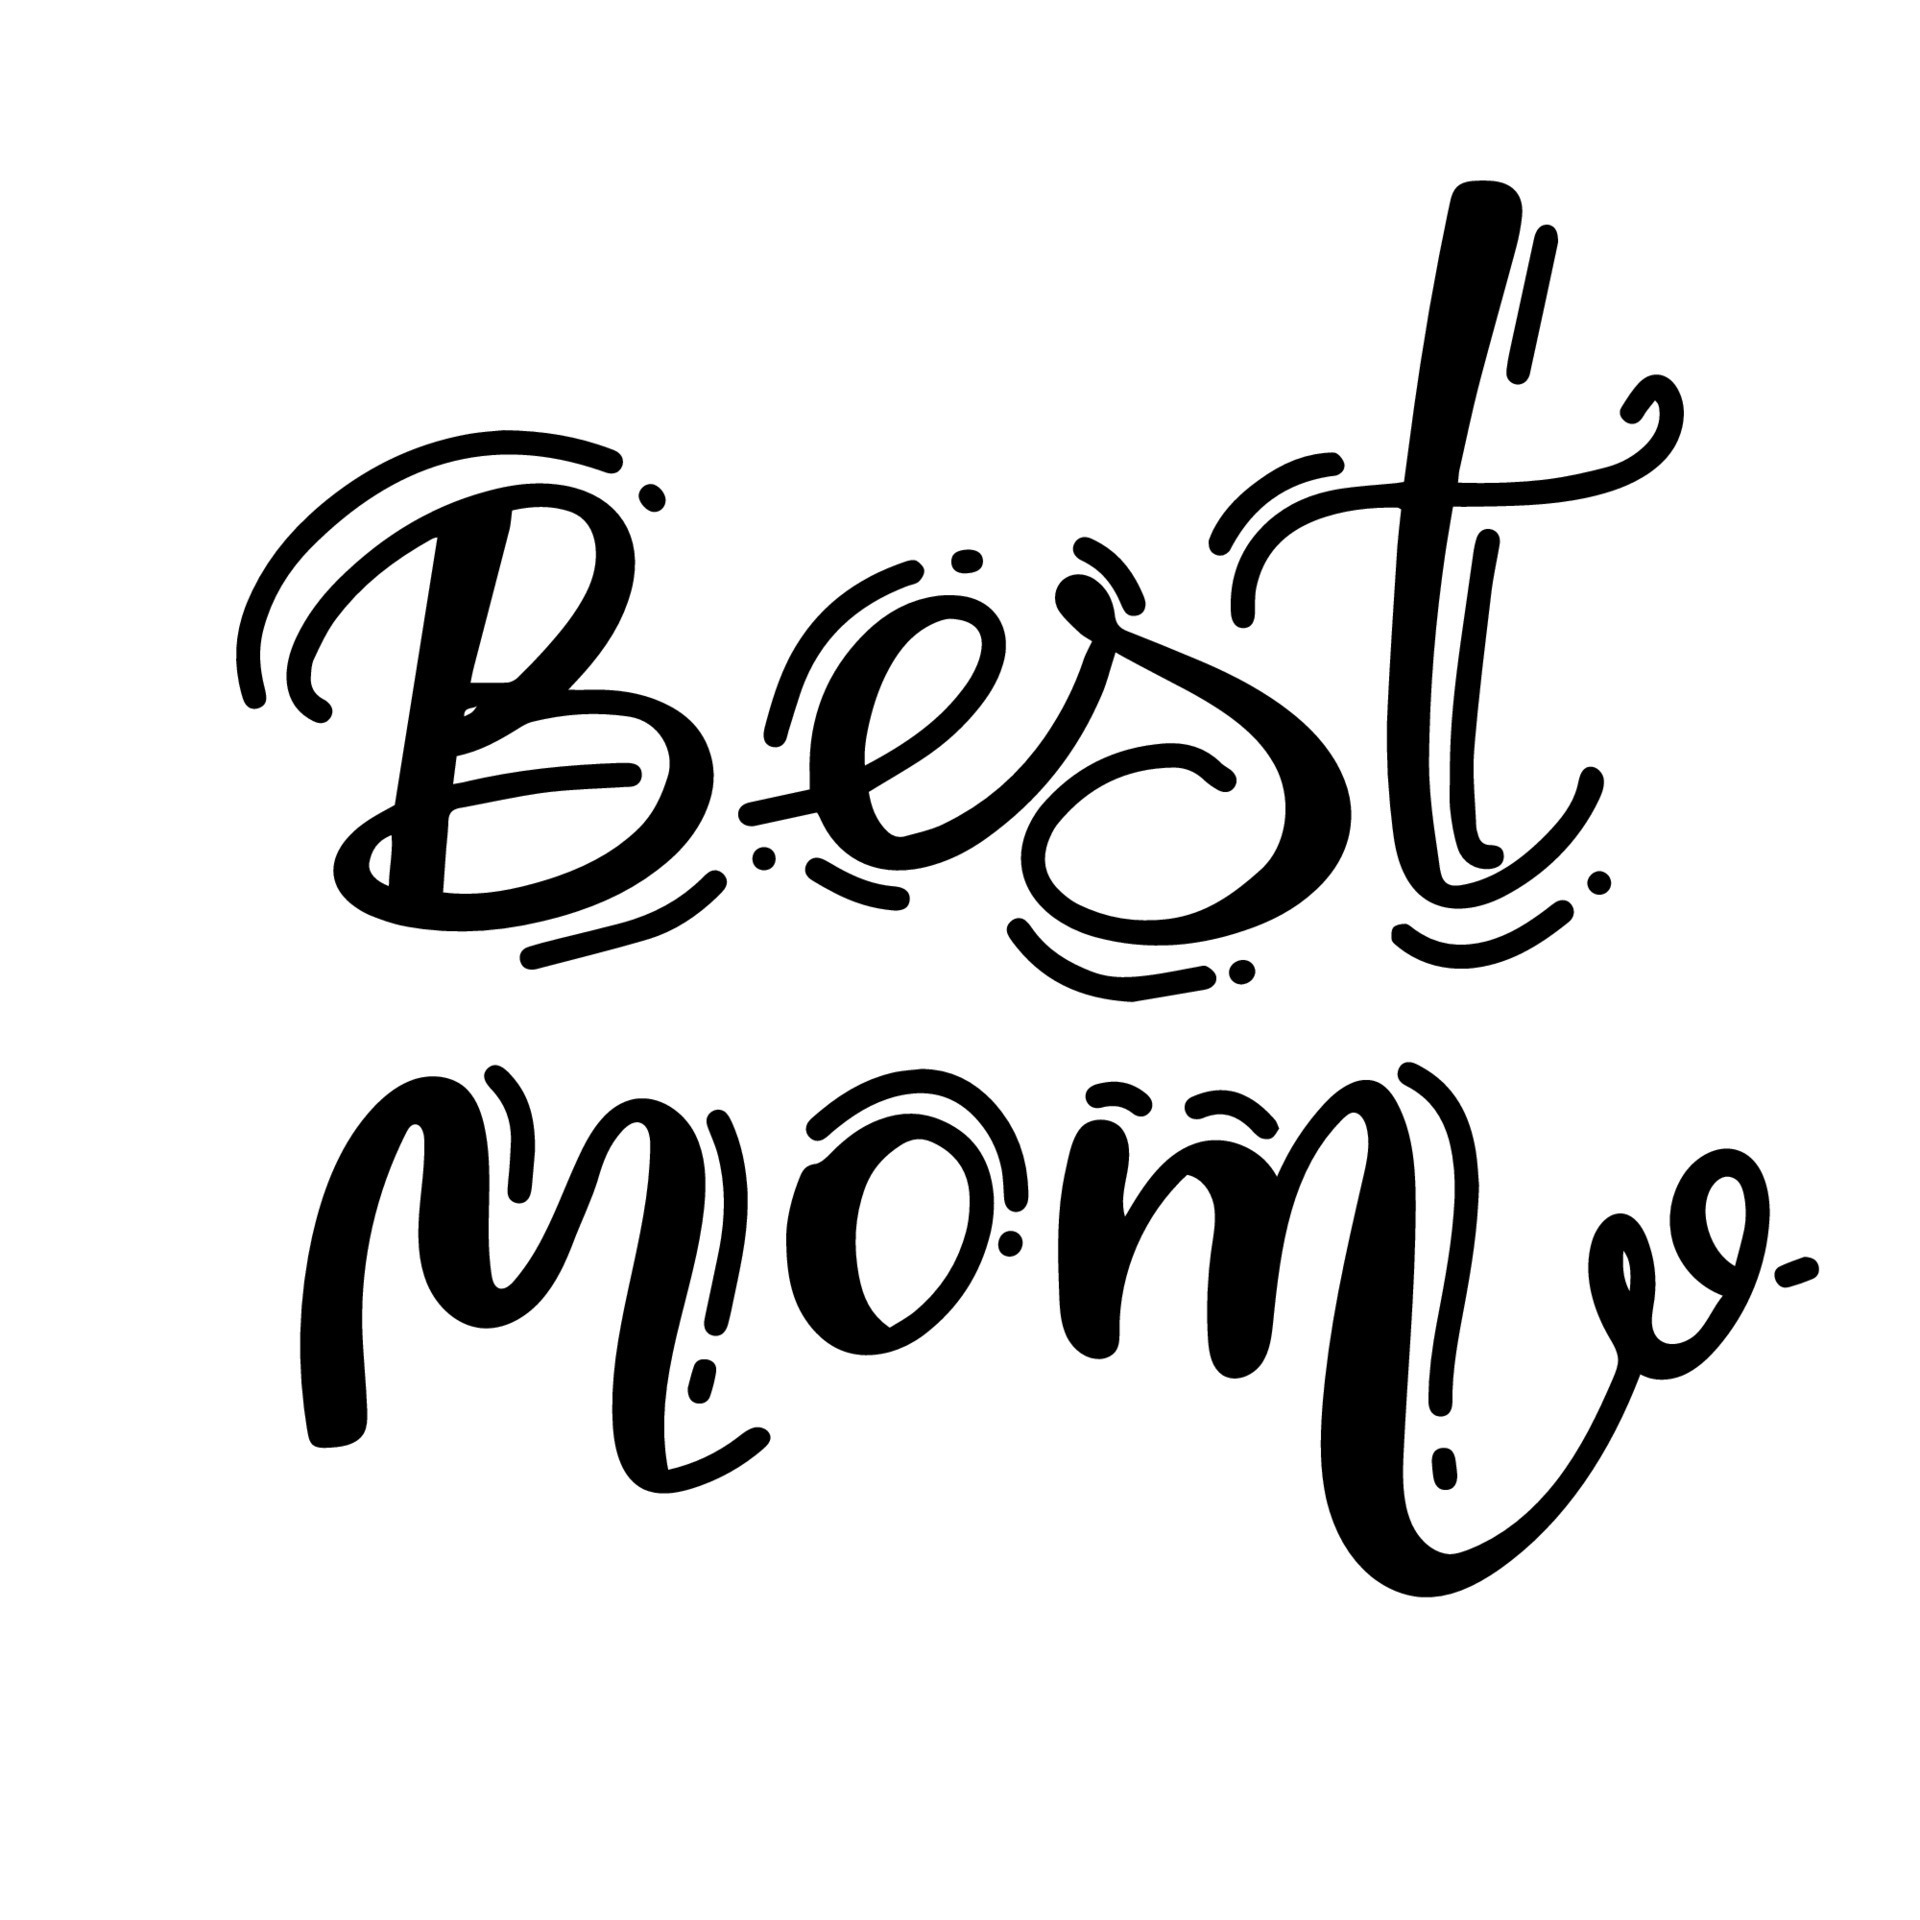 https://static.vecteezy.com/system/resources/previews/014/581/660/original/best-mom-happy-mothers-day-lettering-handmade-calligraphy-illustration-mother-s-day-card-with-hashtag-good-for-scrap-booking-posters-textiles-gifts-vector.jpg